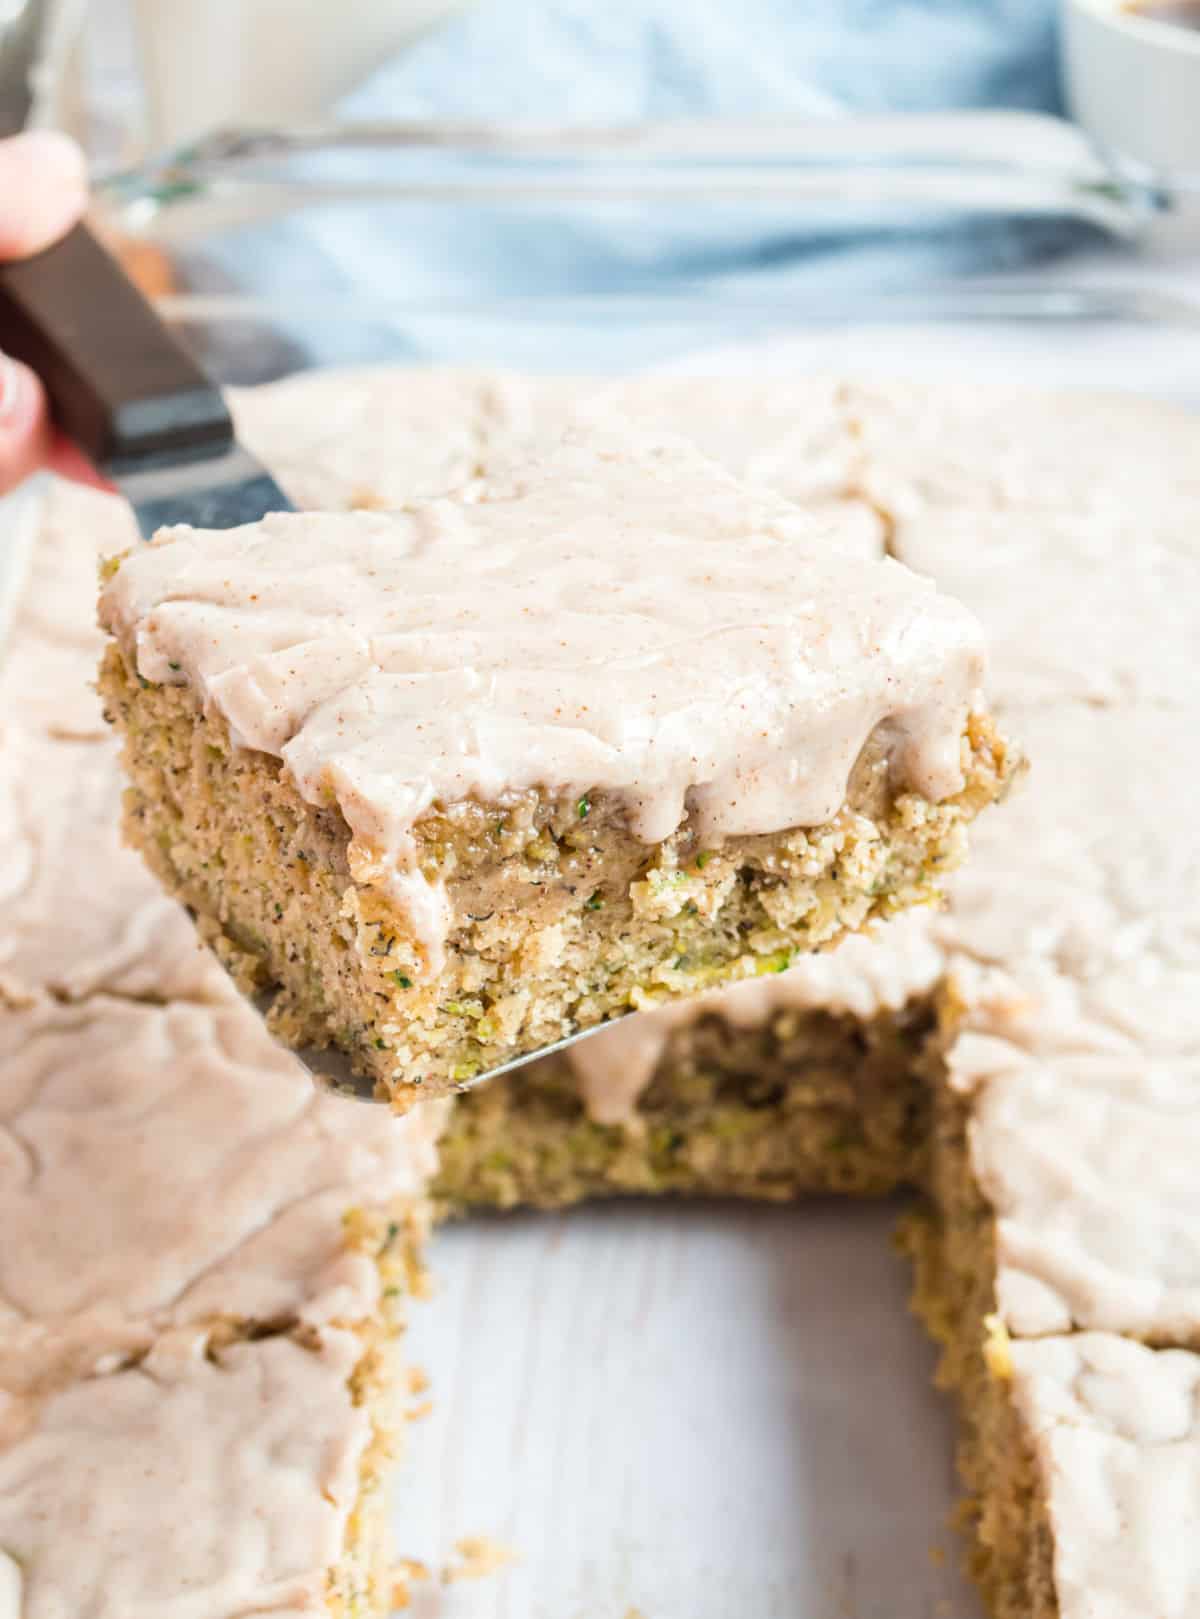 Zucchini banana bars lifted out of a dish with spatula.